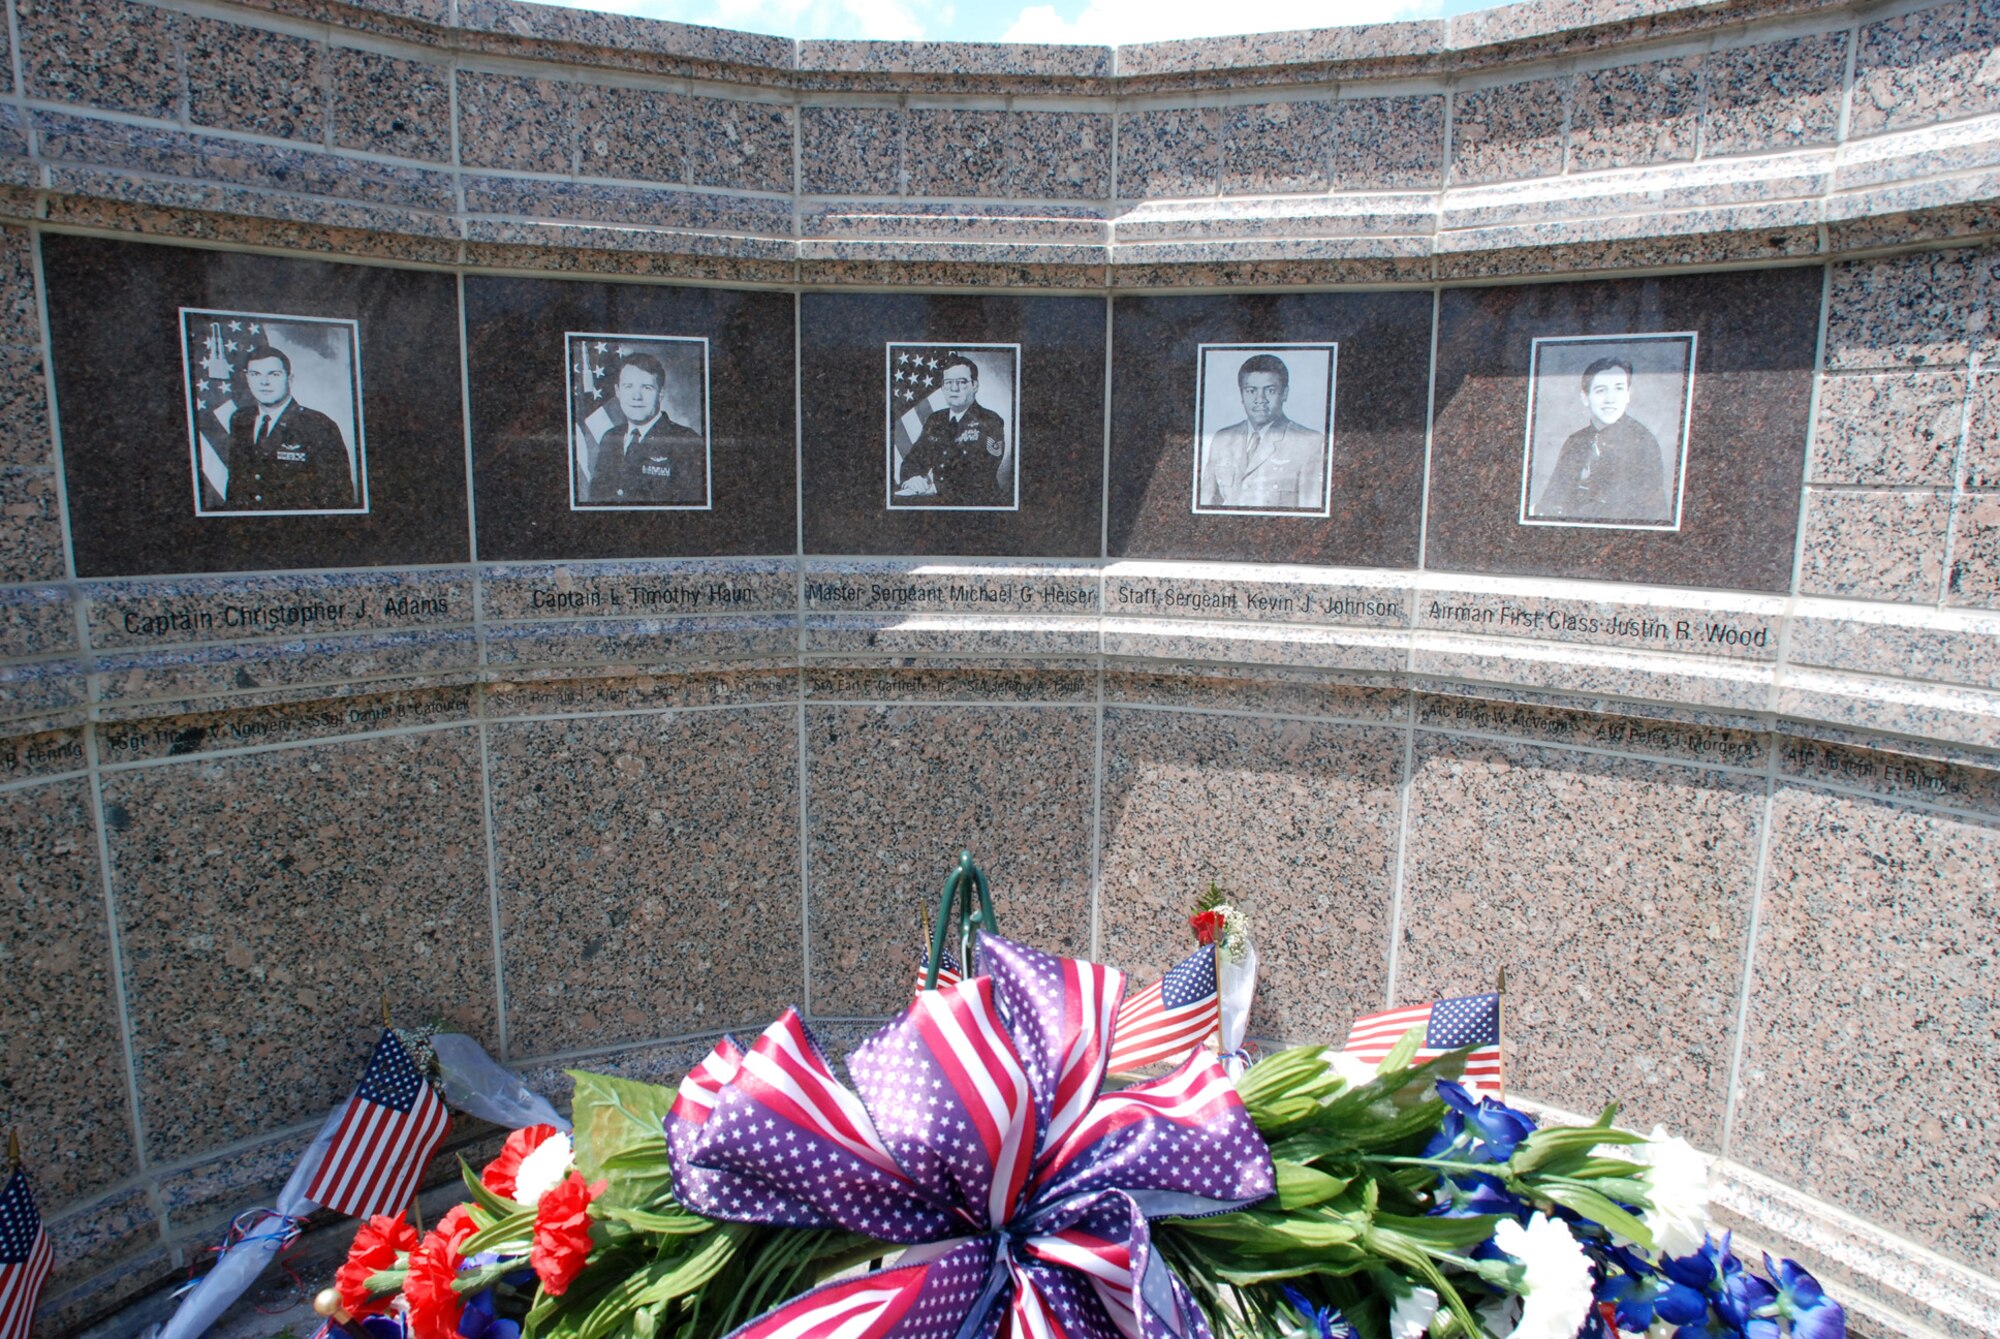 PATRICK AIR FORCE BASE, Fla.- The 920th Rescue Wing here held a ceremony for the victims of Khobar Towers. From left to right: Capt. Christopher J. Adams, Capt. Leland T. Haun, Master Sgt. Michael G. Heiser, Staff Sgt. Kevin J. Johnson and Airman First Class Justin R. Wood were the five airmen from Patrick that lost their lives 15 years ago. This is the 15th year anniversary of the bombing. (U.S. photo/Airman First Class Natasha Dowridge)